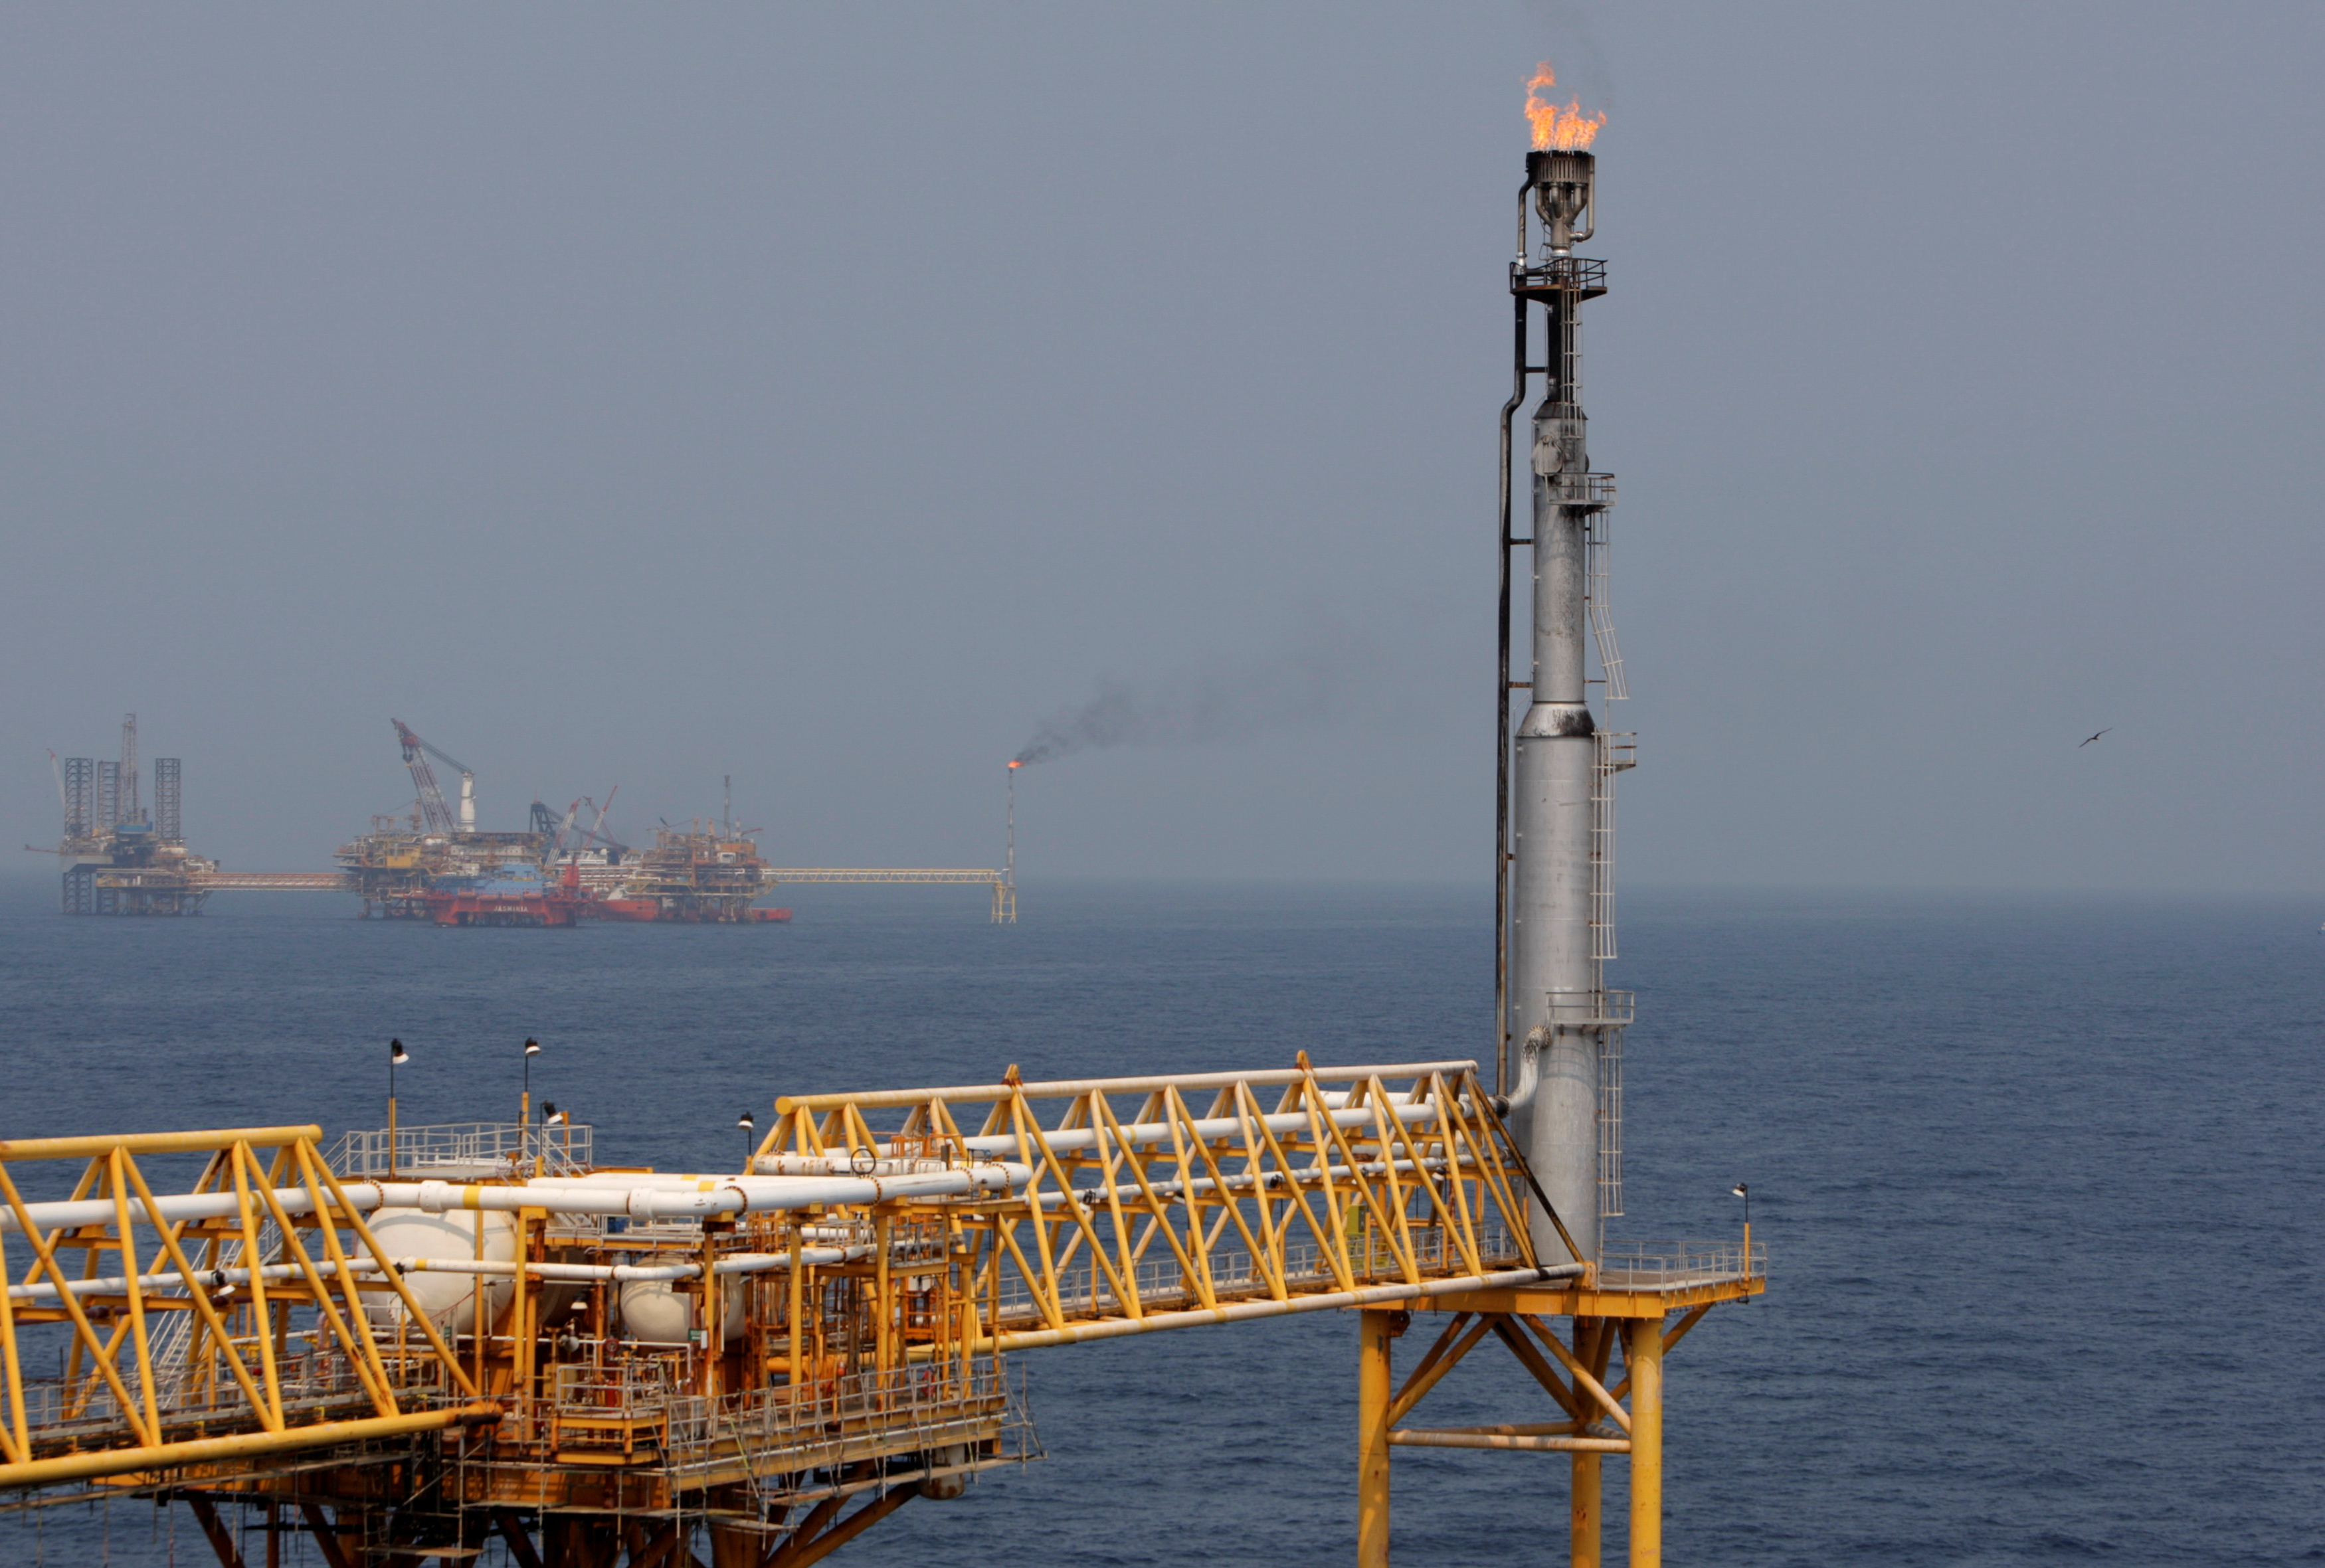 A fuel burner is seen at Mexico's state-run oil monopoly Pemex platform 